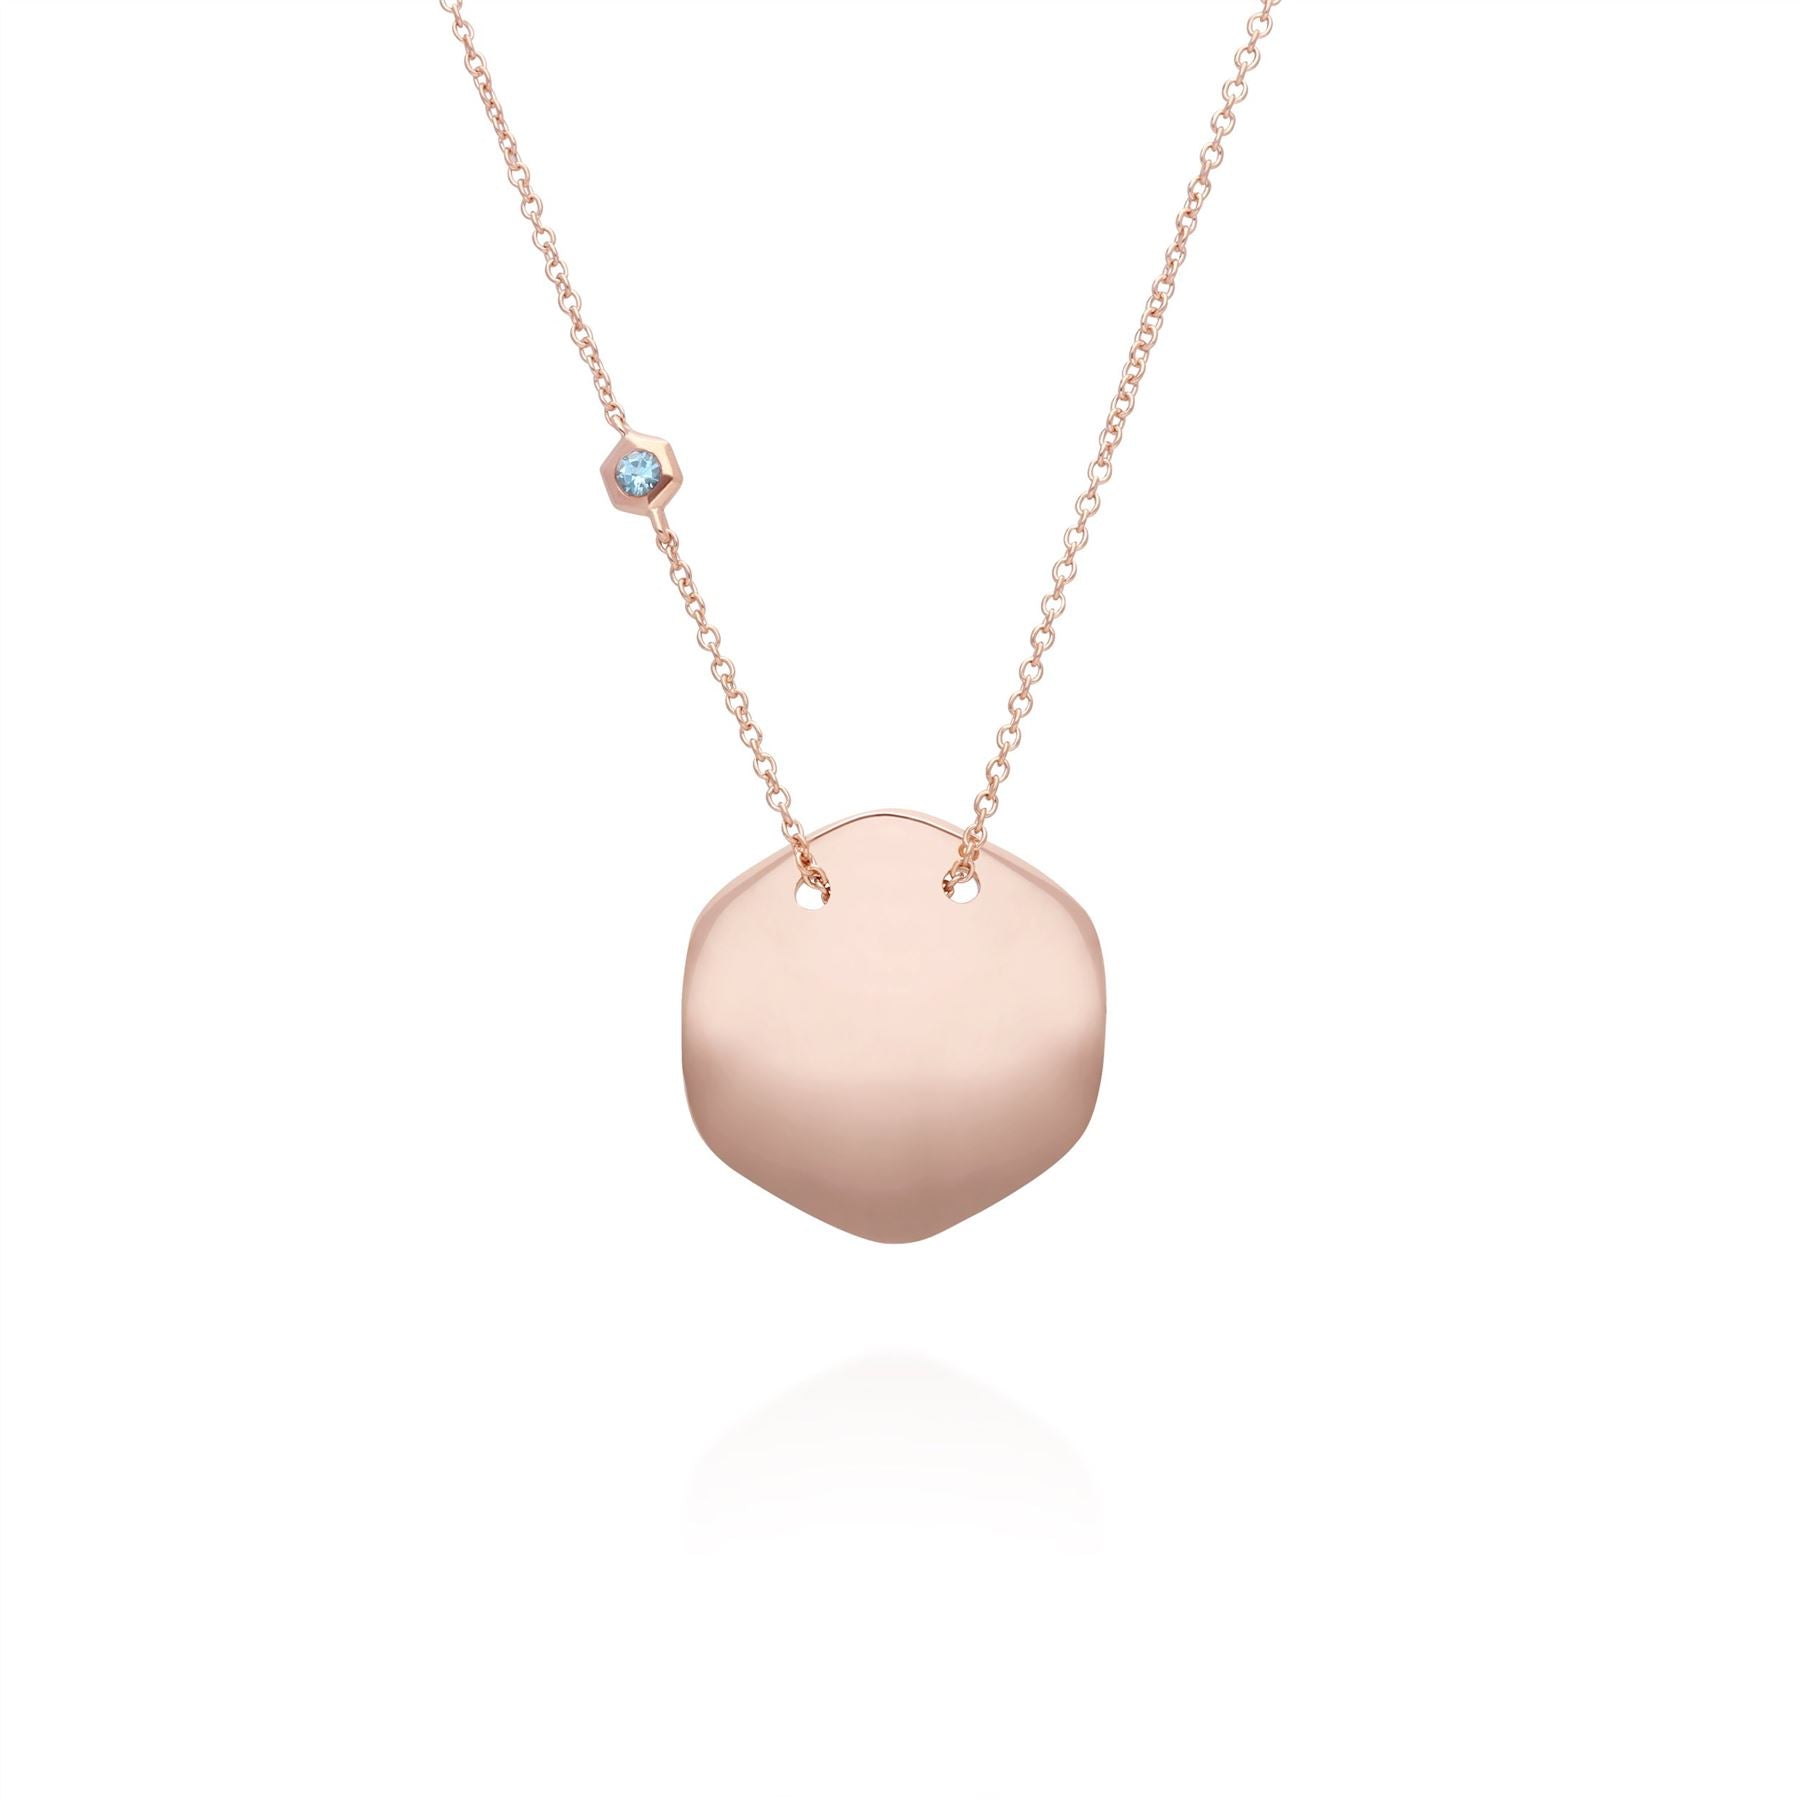 Topaz Engravable Necklace in Rose Gold Plated Sterling Silver